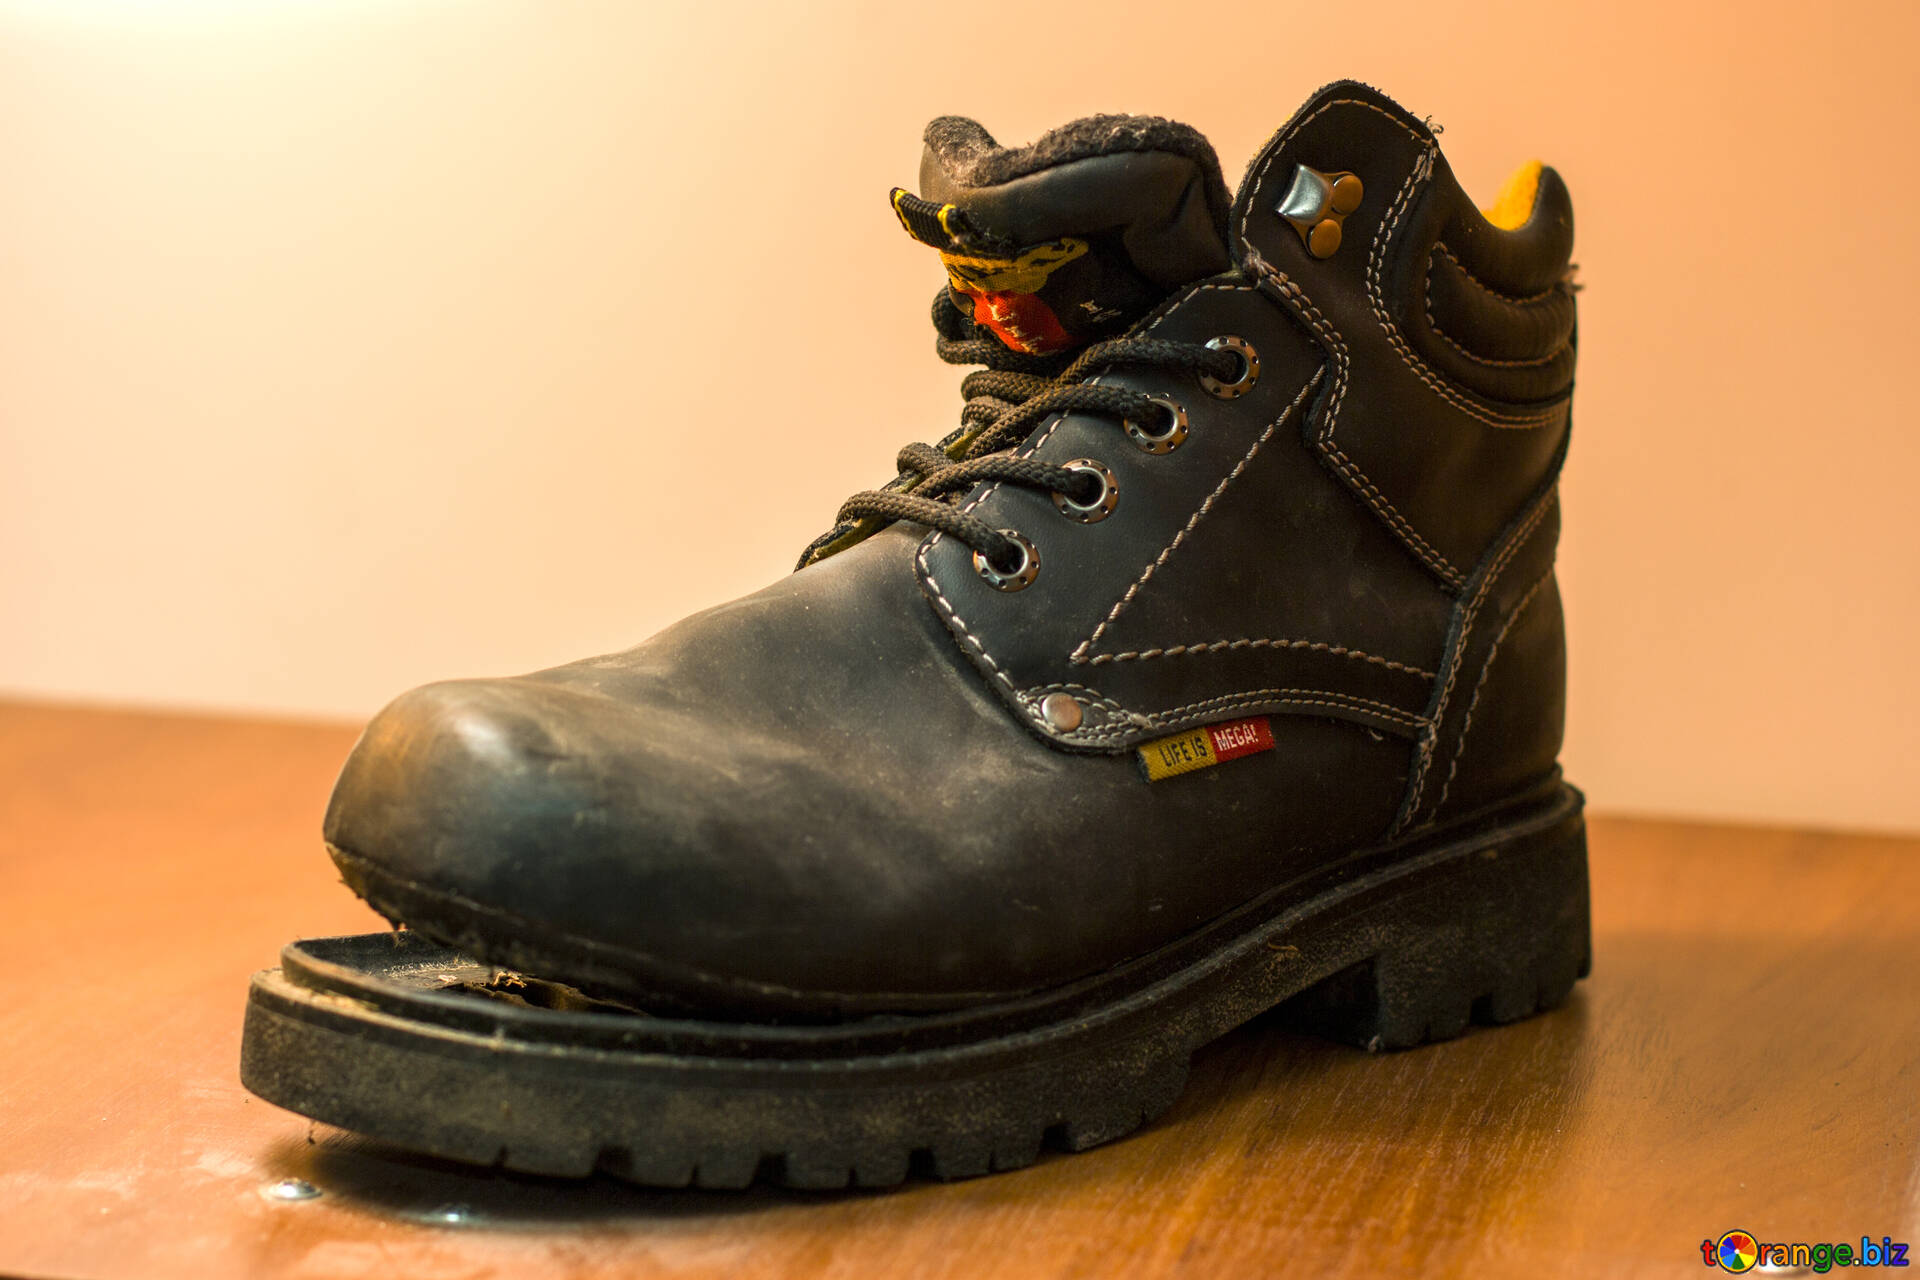 A leather work boot where the sole is separating from the upper.